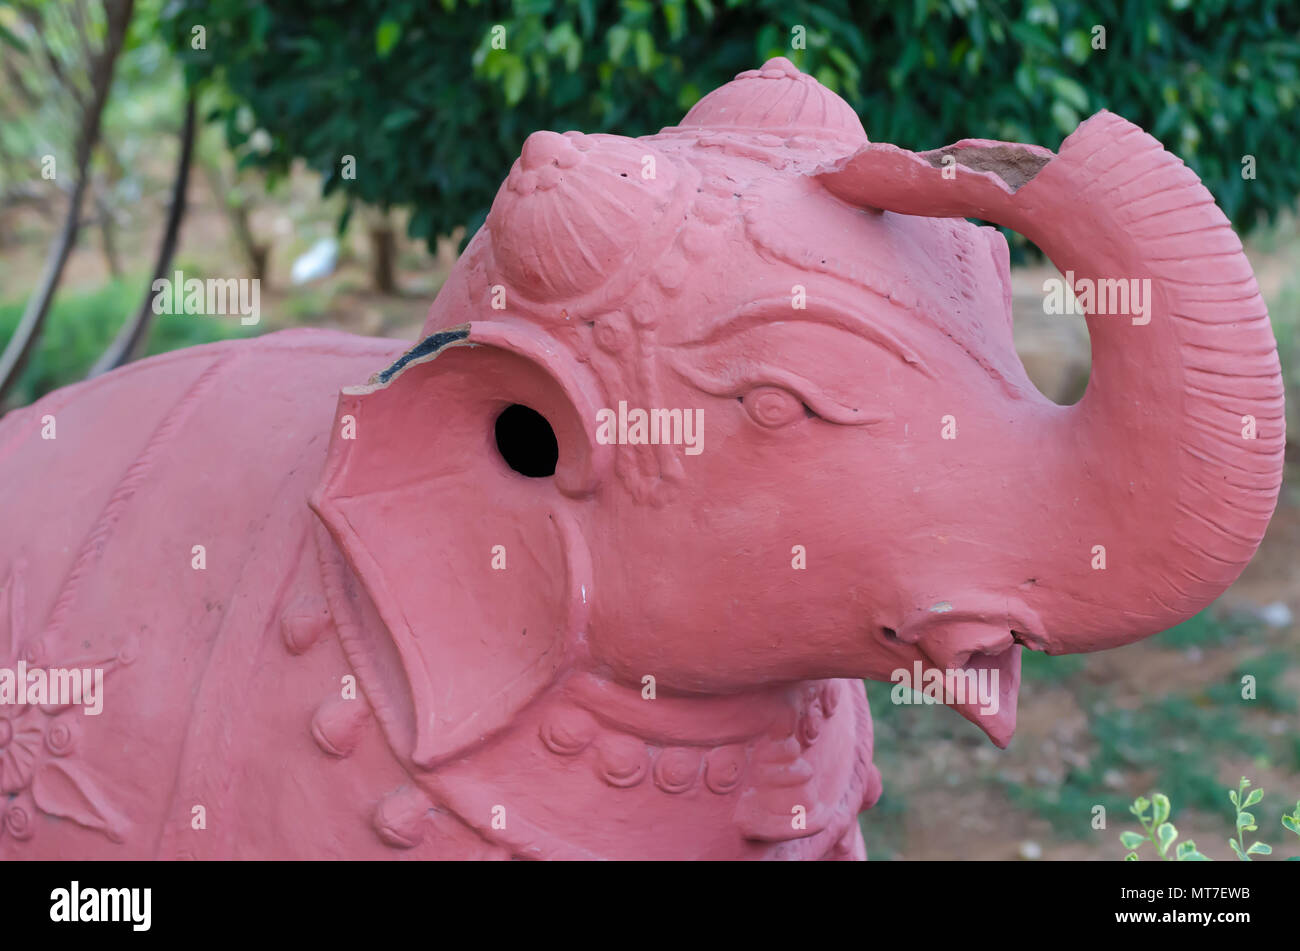 A damaged teracotta elephant at Shilparamam arts and crafts village in Hyderabad, India. Image signifies defect, damage, flaw, spoil or imperfection. Stock Photo